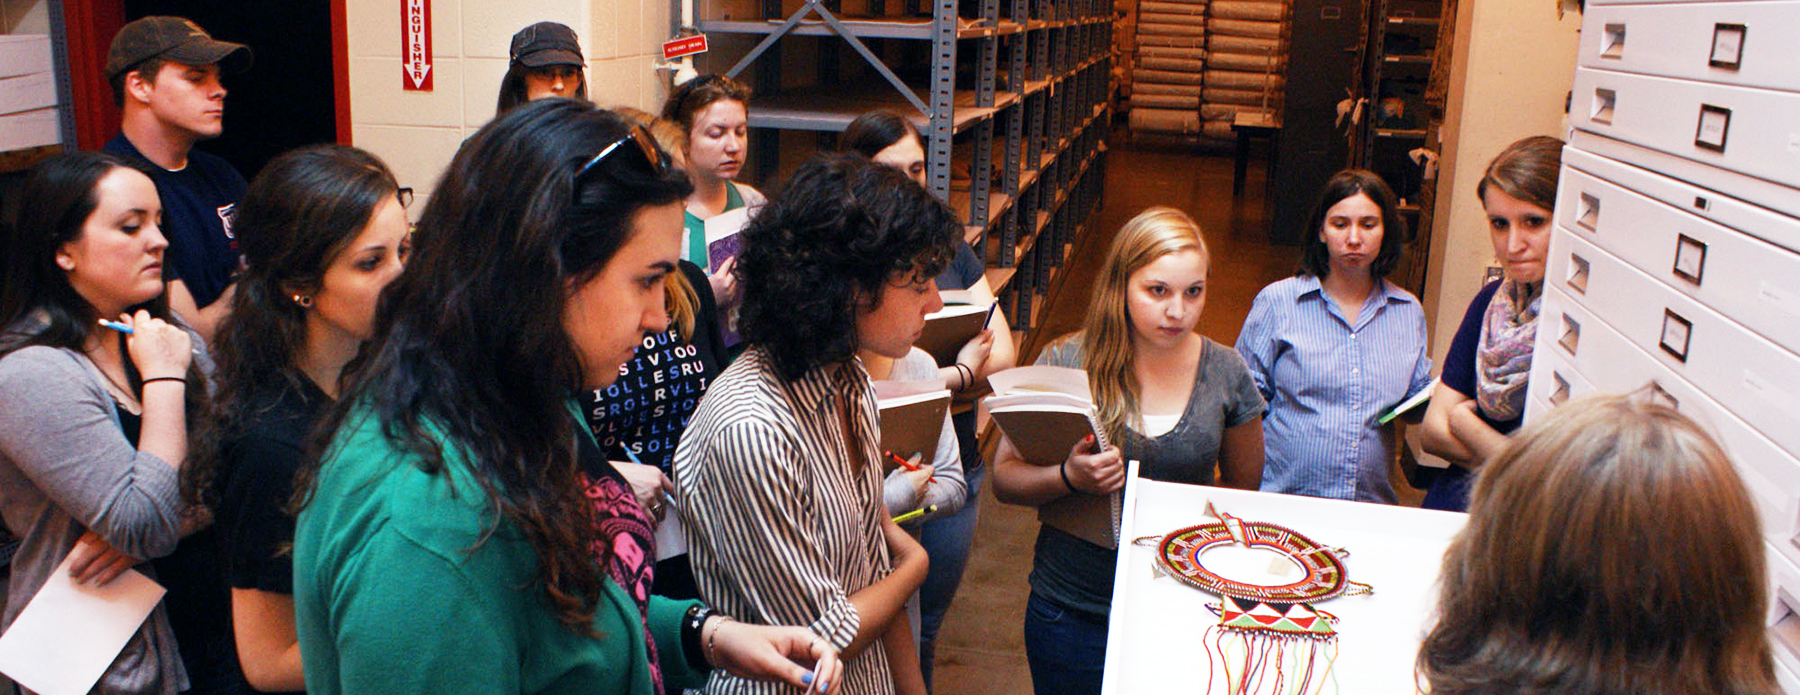 A group of students listen to an instructor speak about an artifact that is displayed on a shelf in the bottom right of the photo.